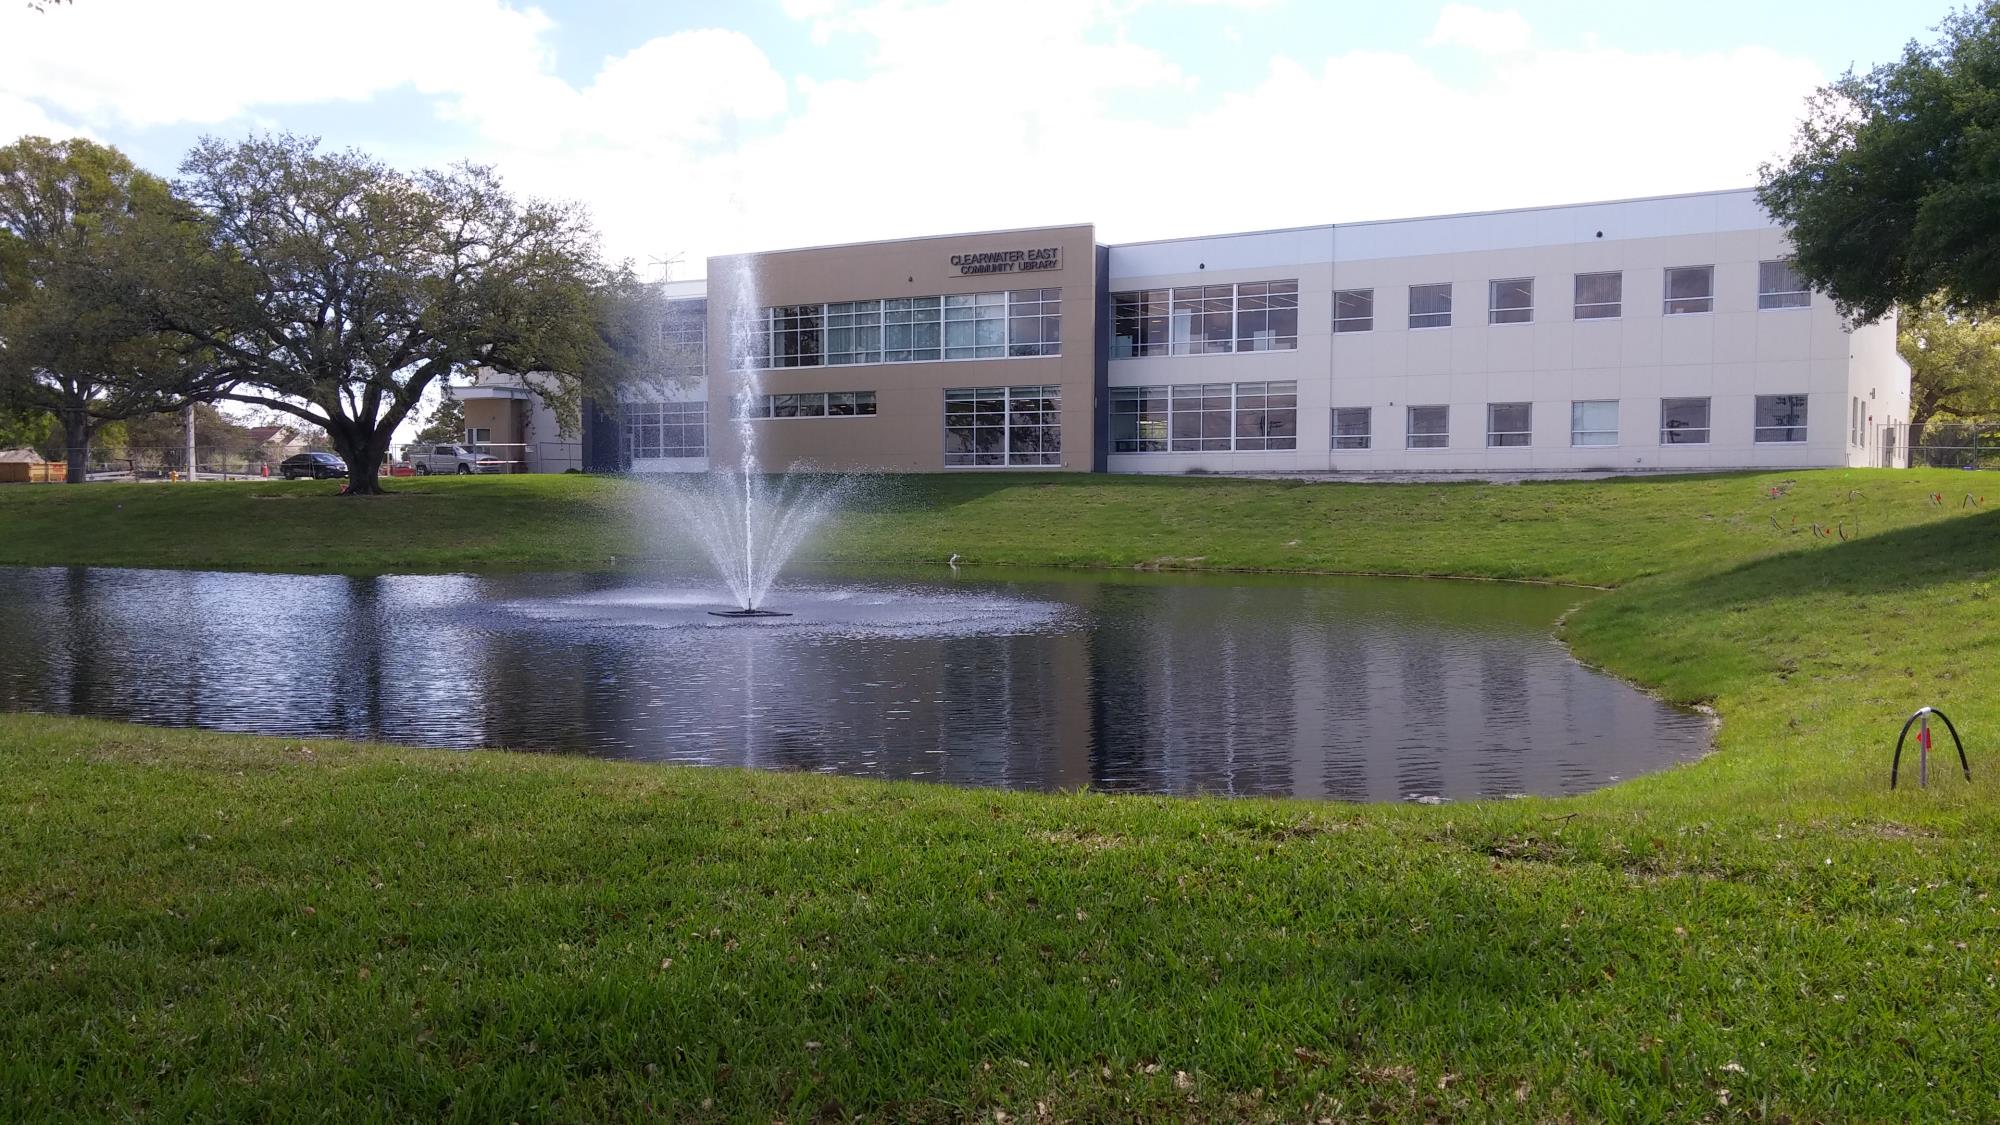 Exterior shot of Clearwater East Community Library with a view of the fountain